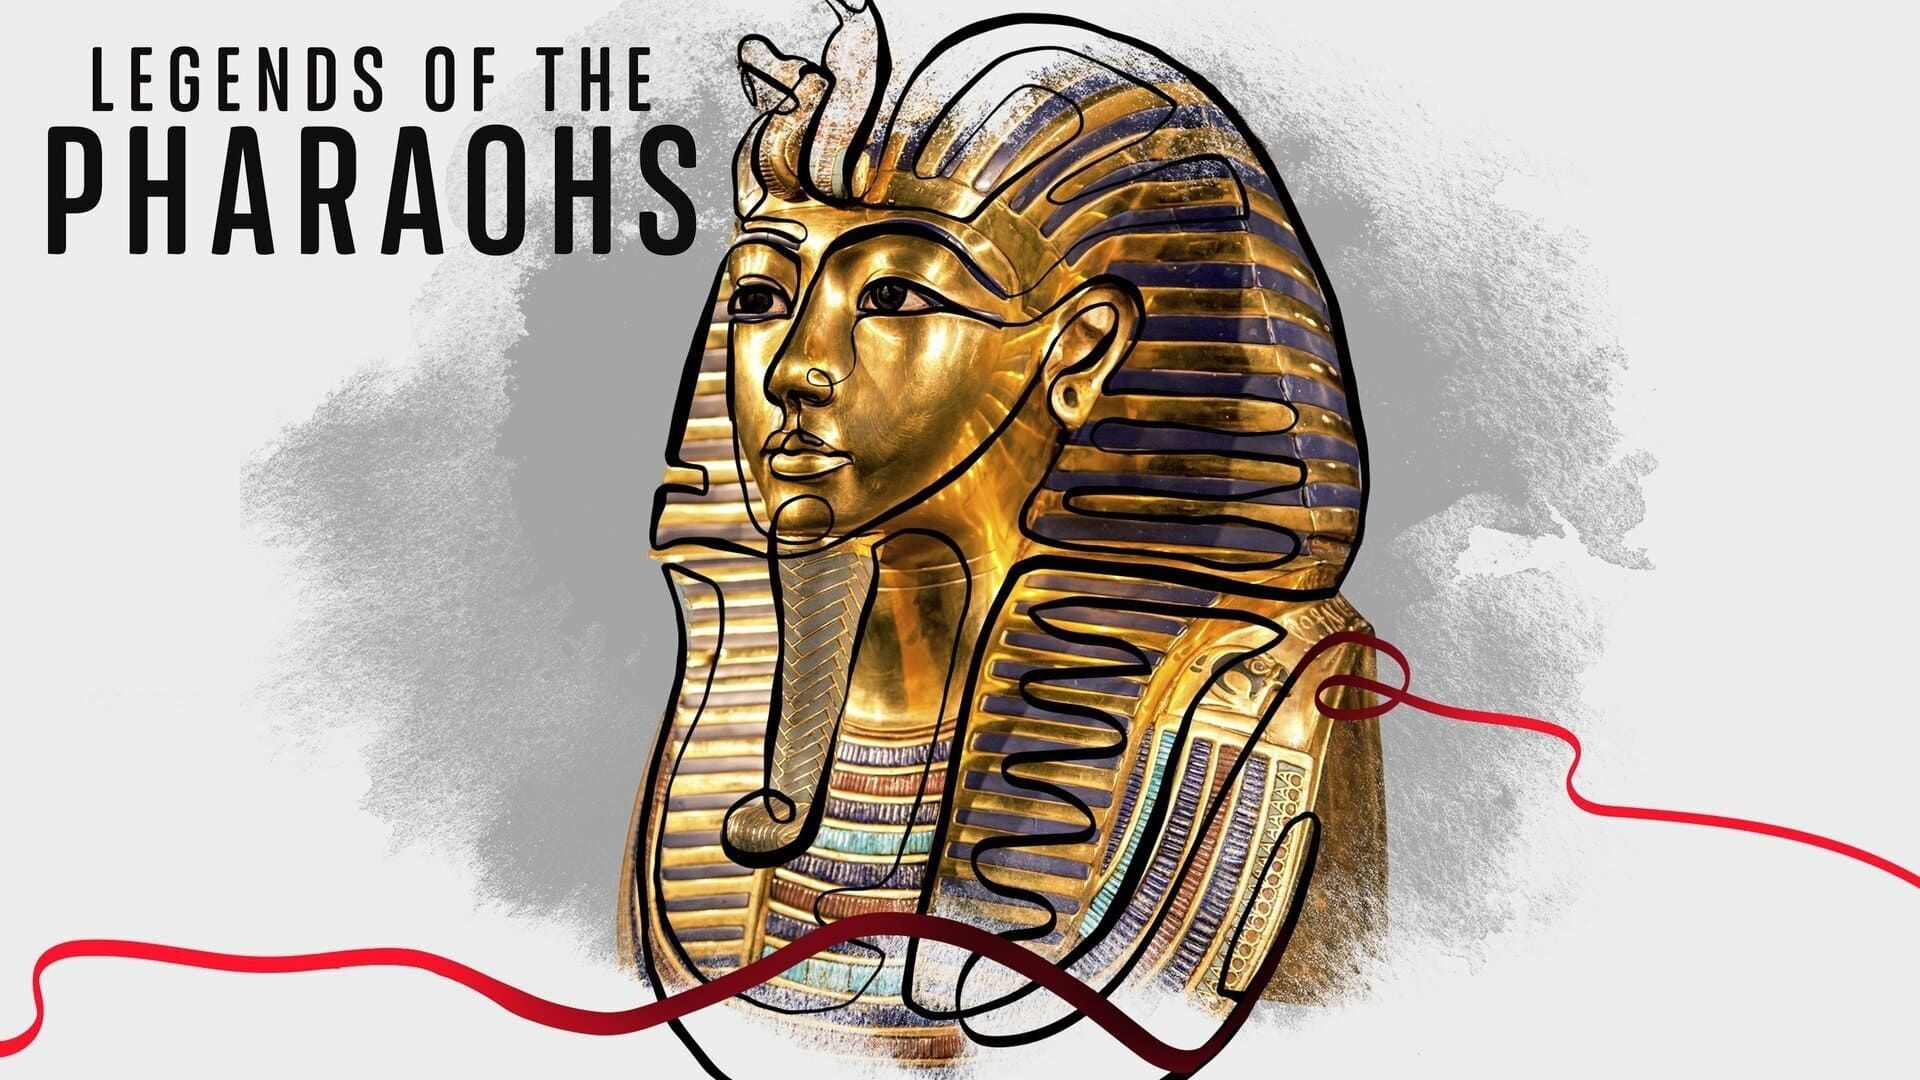 Legends of the Pharaohs background